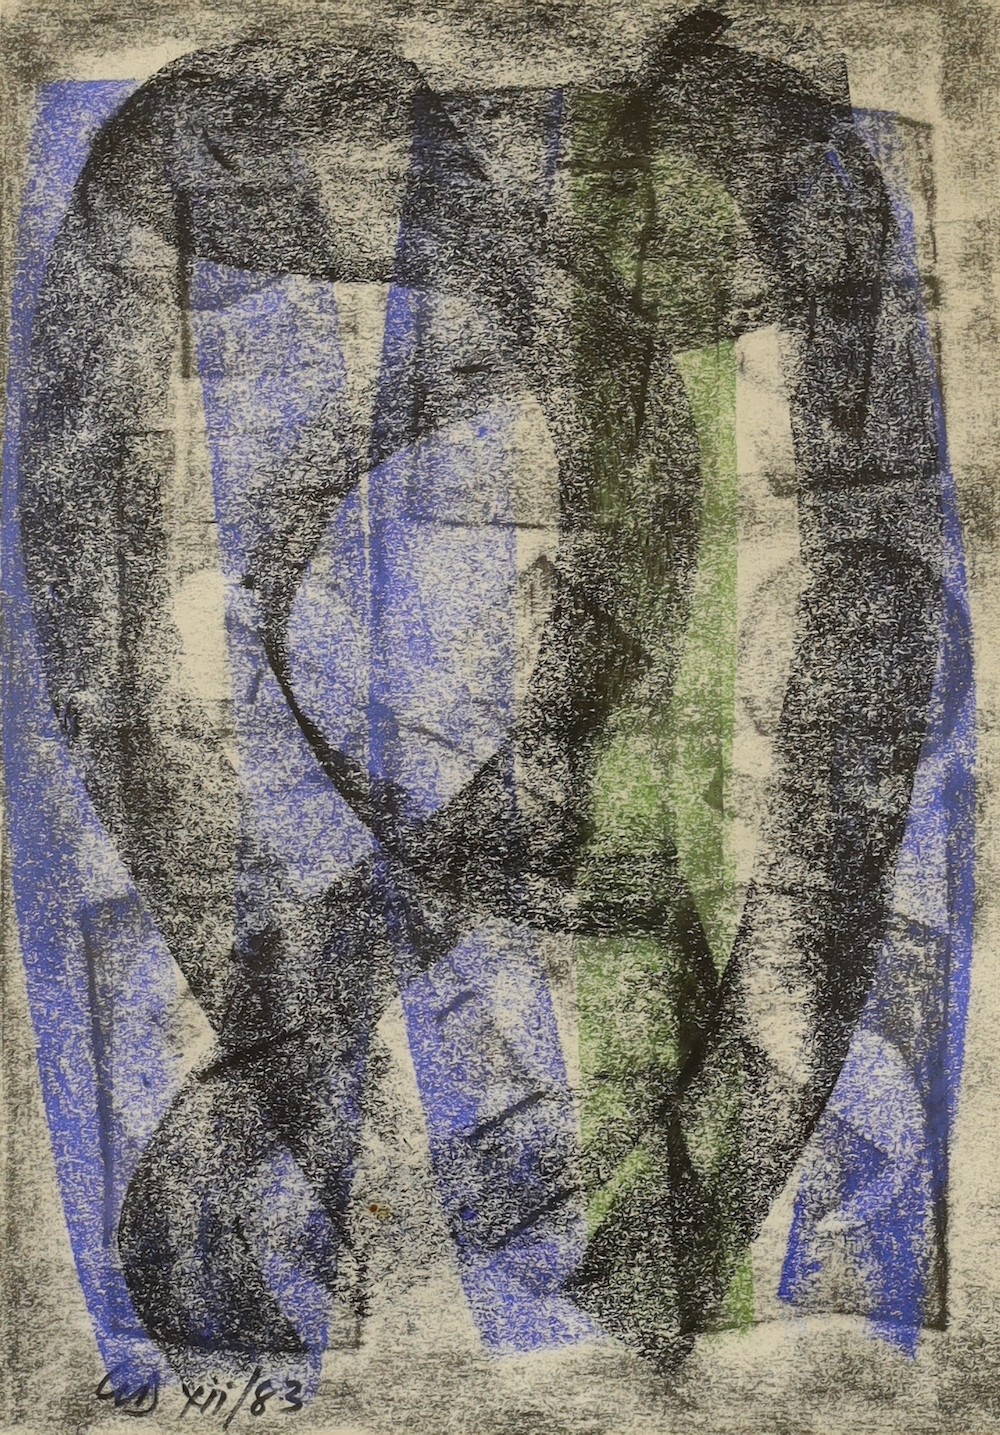 George Dannatt (1915-2009), conté crayon, 'Drawing Series 3 (Green Venture)', initialled and dated '83, 30 x 21cm                                                                                                           